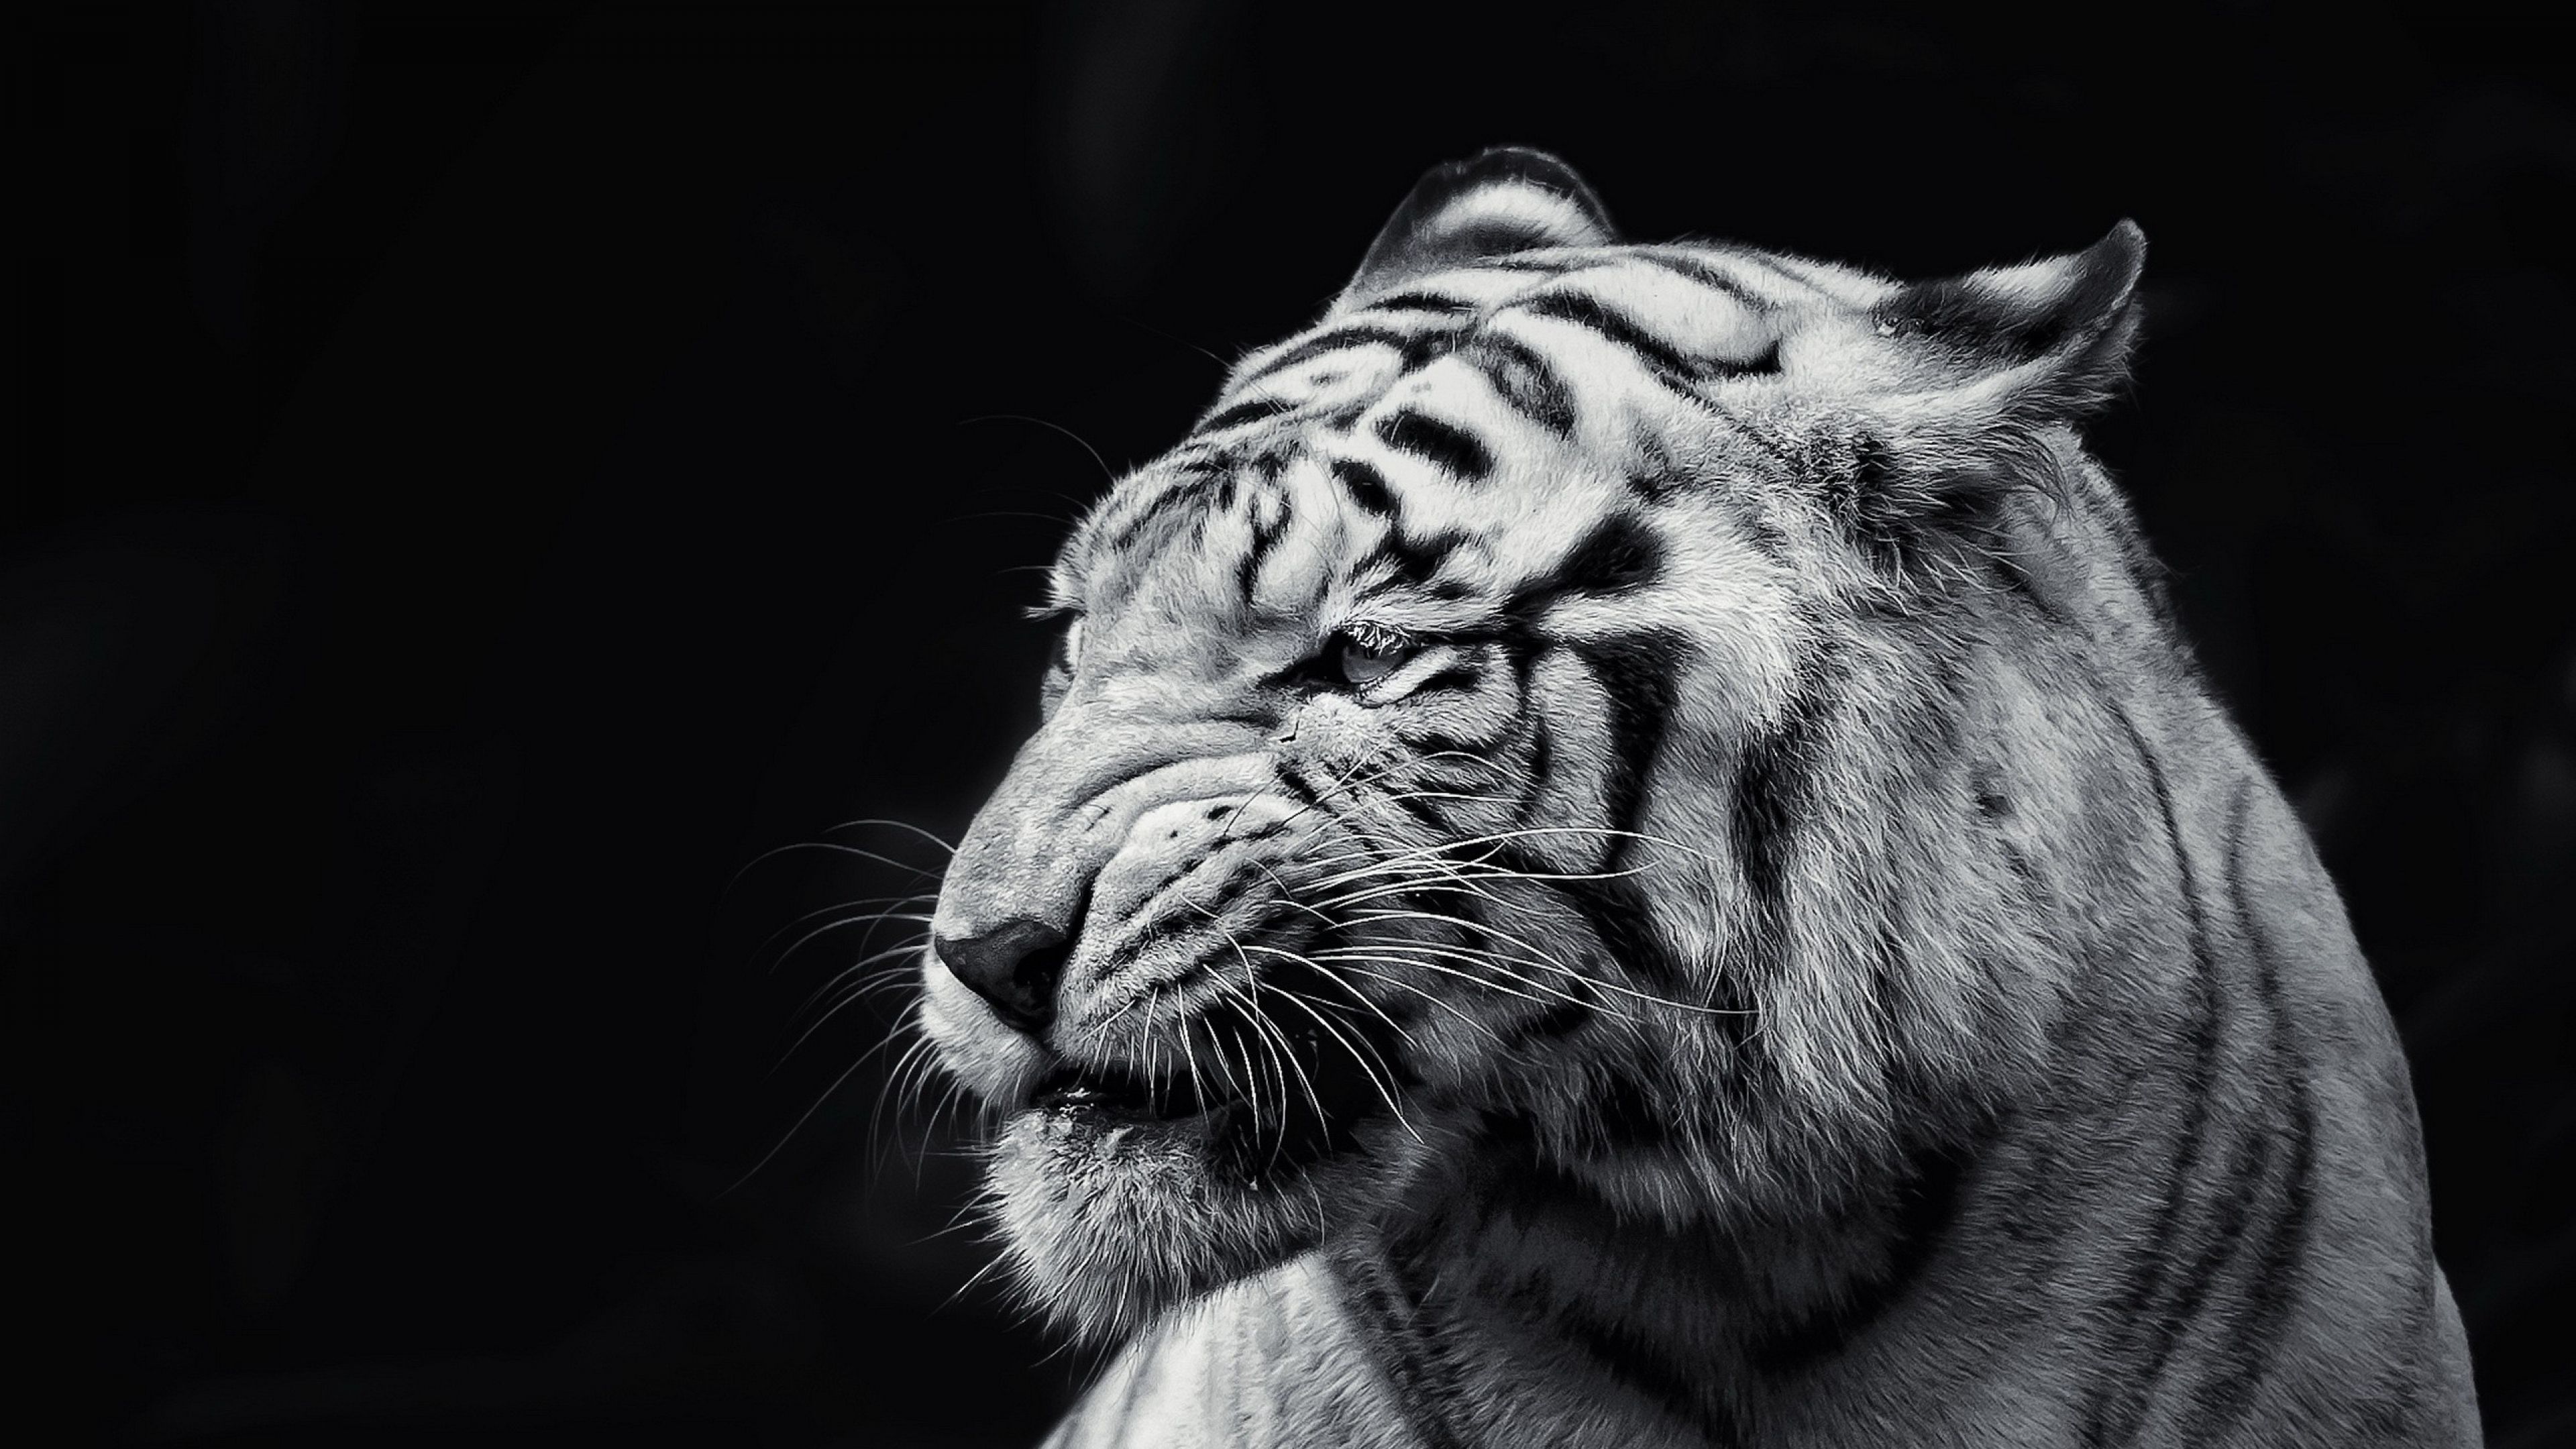 Download Wallpaper 3840x2160 Tiger, Face, Eyes, Black and white 4K ...